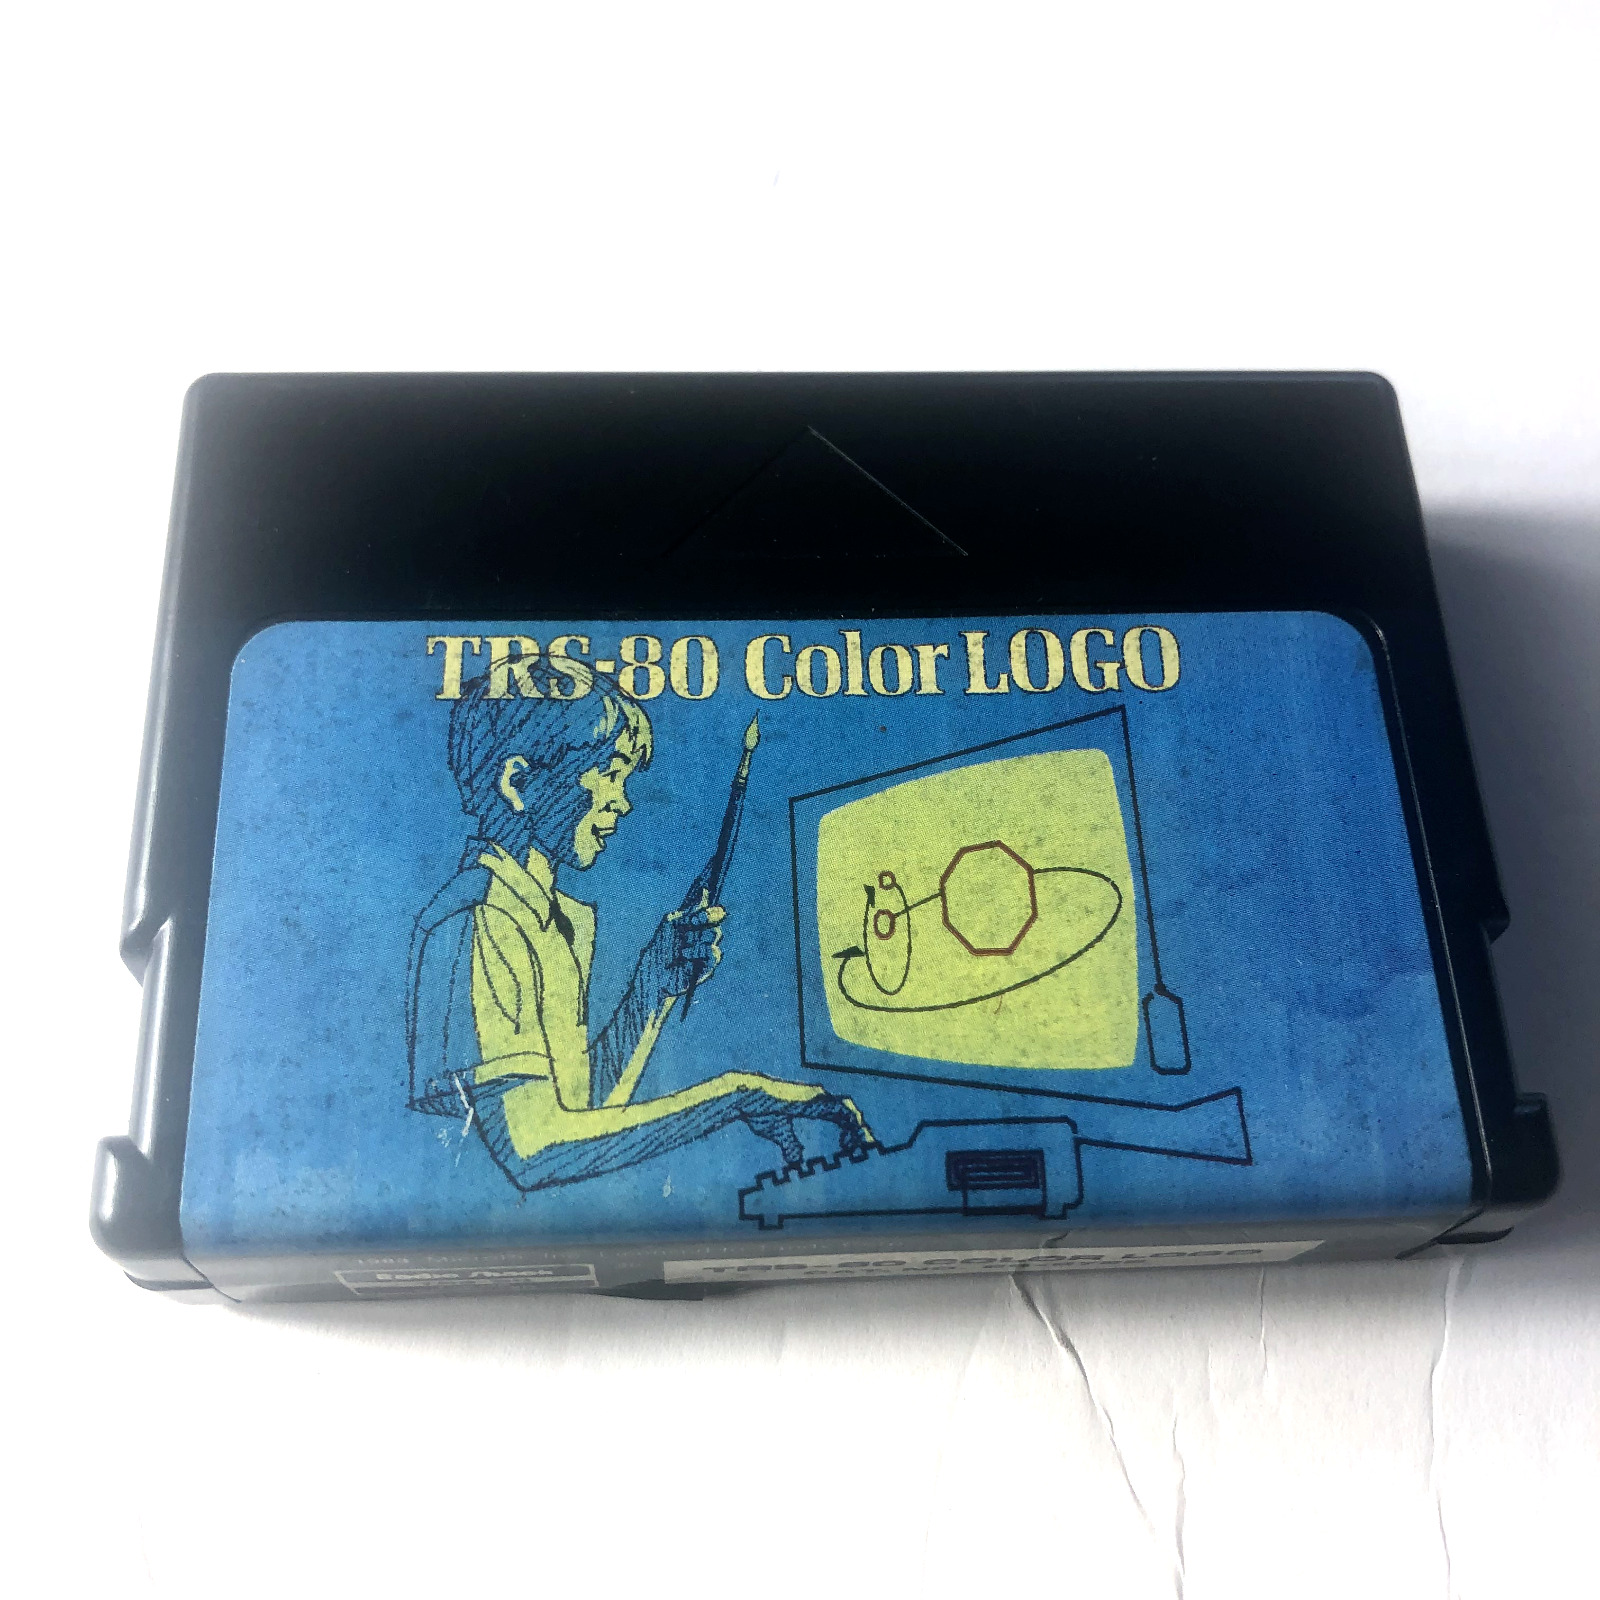 1983 TRS-80 Color Logo cartridge, from Radio Shack, untested.